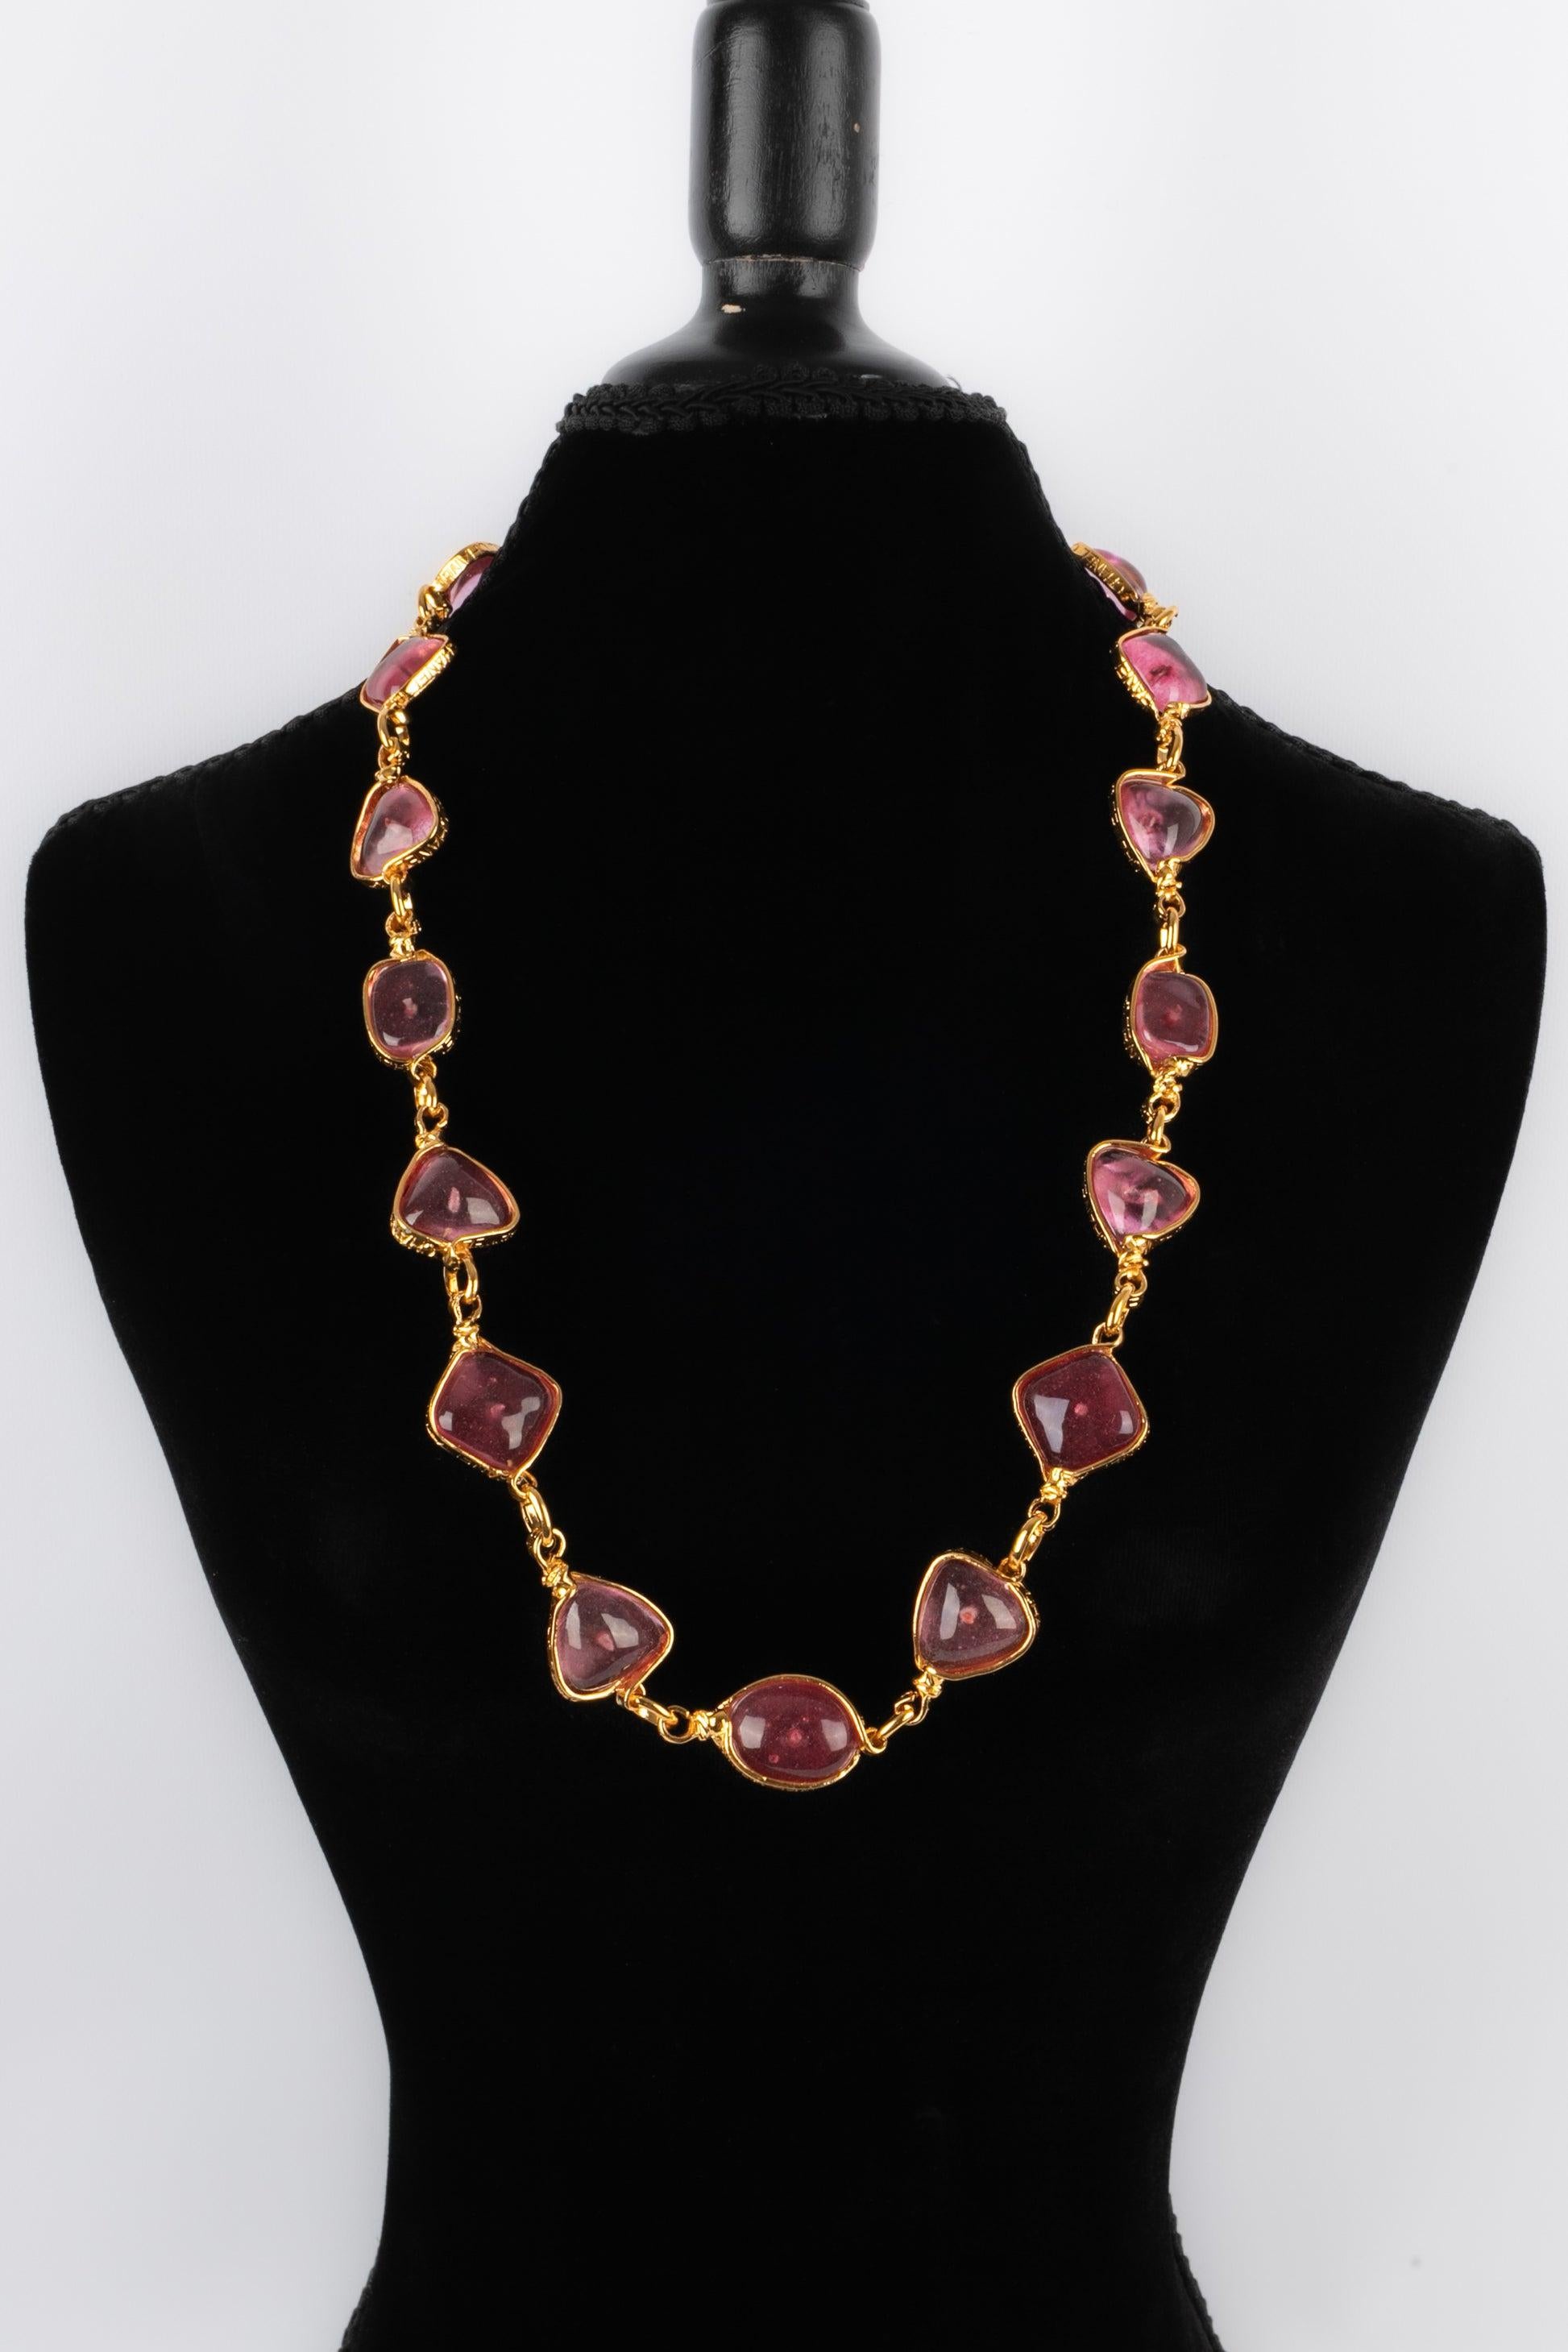 Chanel - (Made in France) Golden metal articulated necklace with pink glass paste. 1996 Spring-Summer Collection.
 
 Additional information: 
 Condition: Very good condition
 Dimensions: Length: 80 cm
 Period: 20th Century
 
 Seller Reference: CB151
